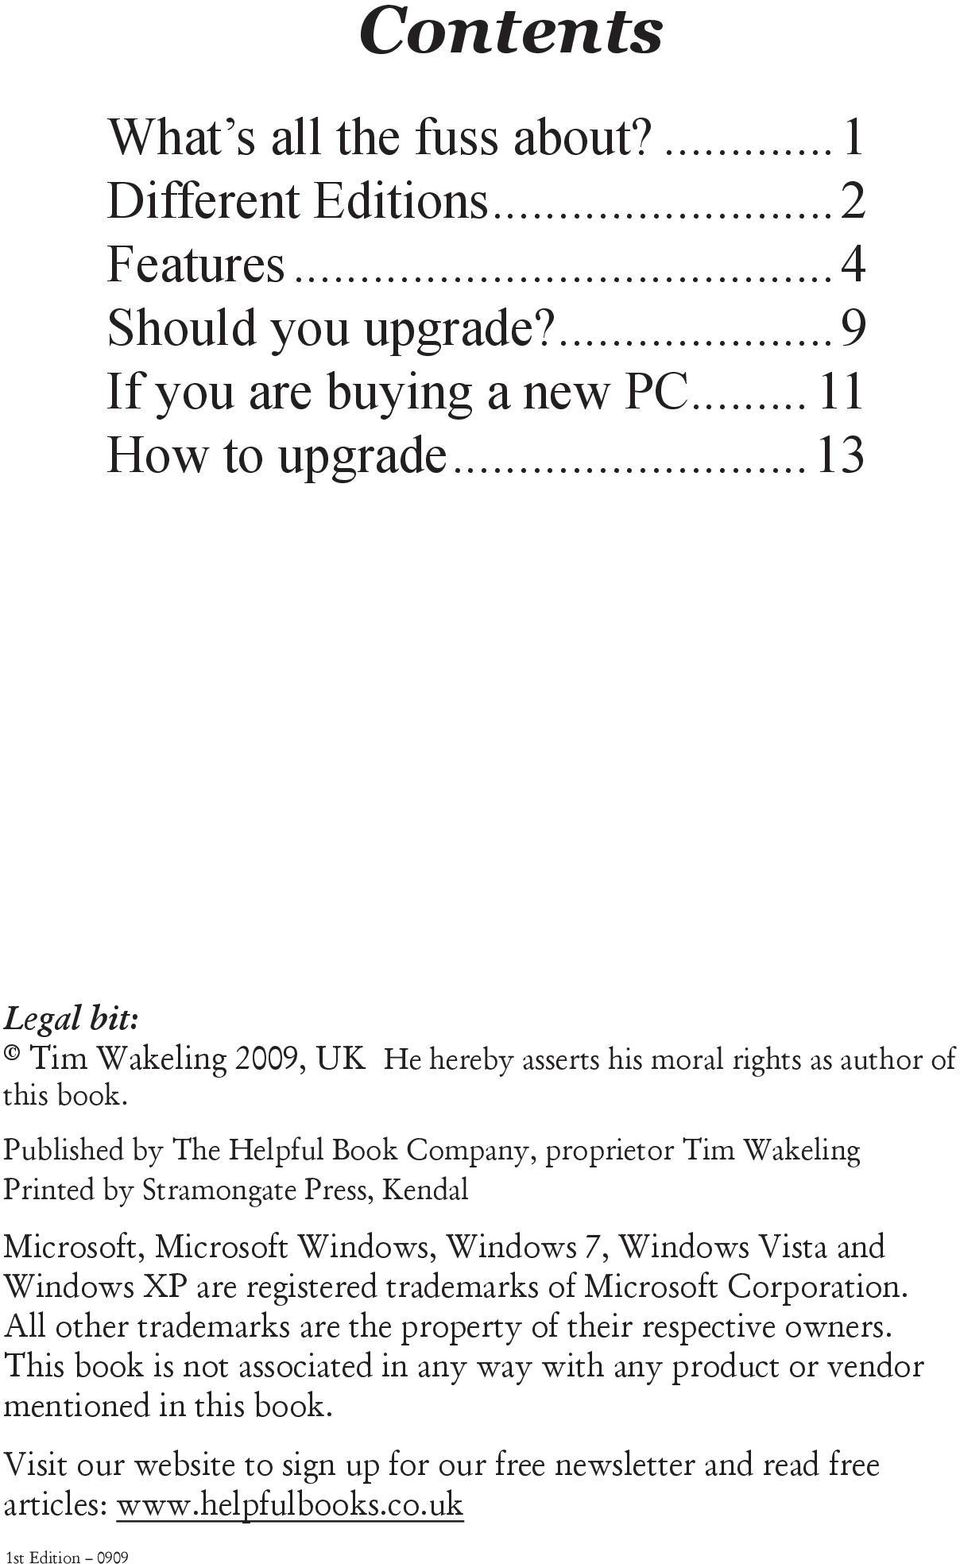 Published by The Helpful Book Company, proprietor Tim Wakeling Printed by Stramongate Press, Kendal Microsoft, Microsoft Windows, Windows 7, Windows Vista and Windows XP are registered